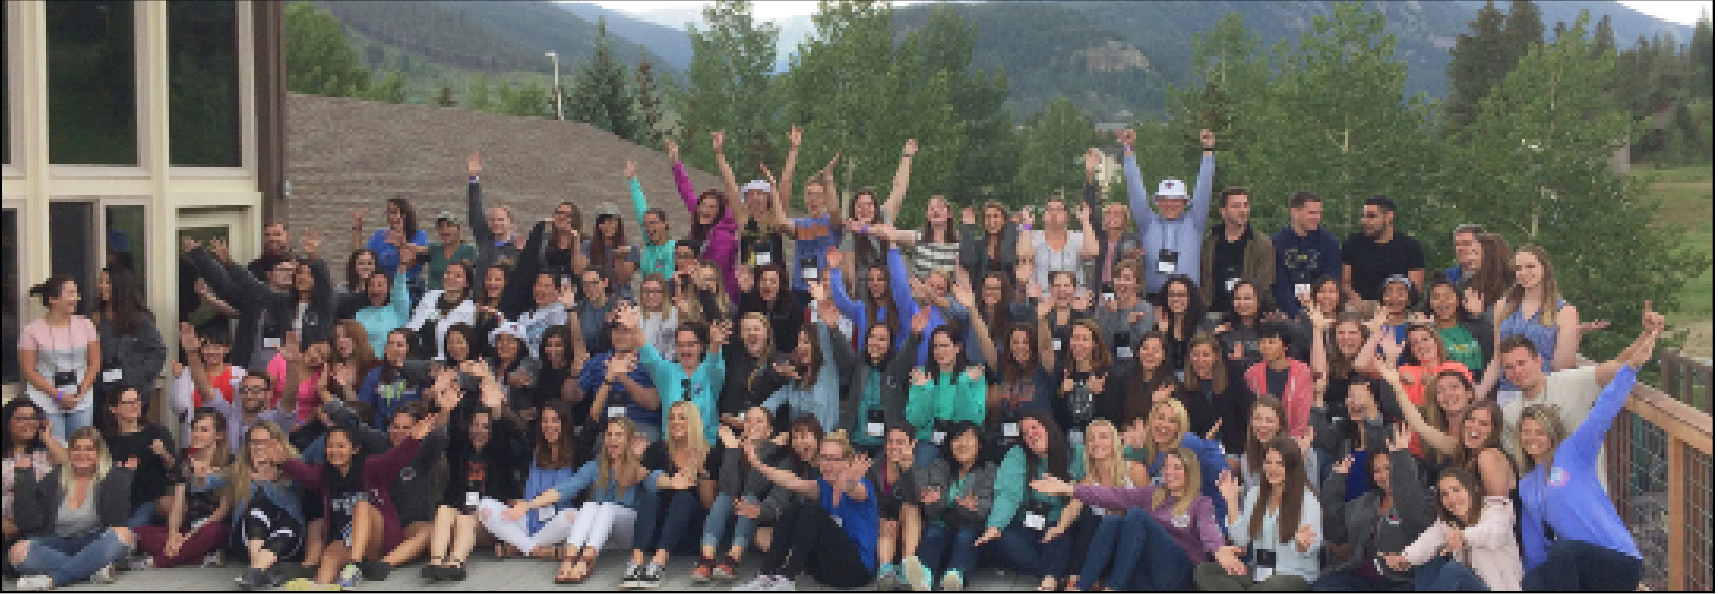 Oticon Audiology Summer Camp Celebrates 20 Years of Fun and Innovative